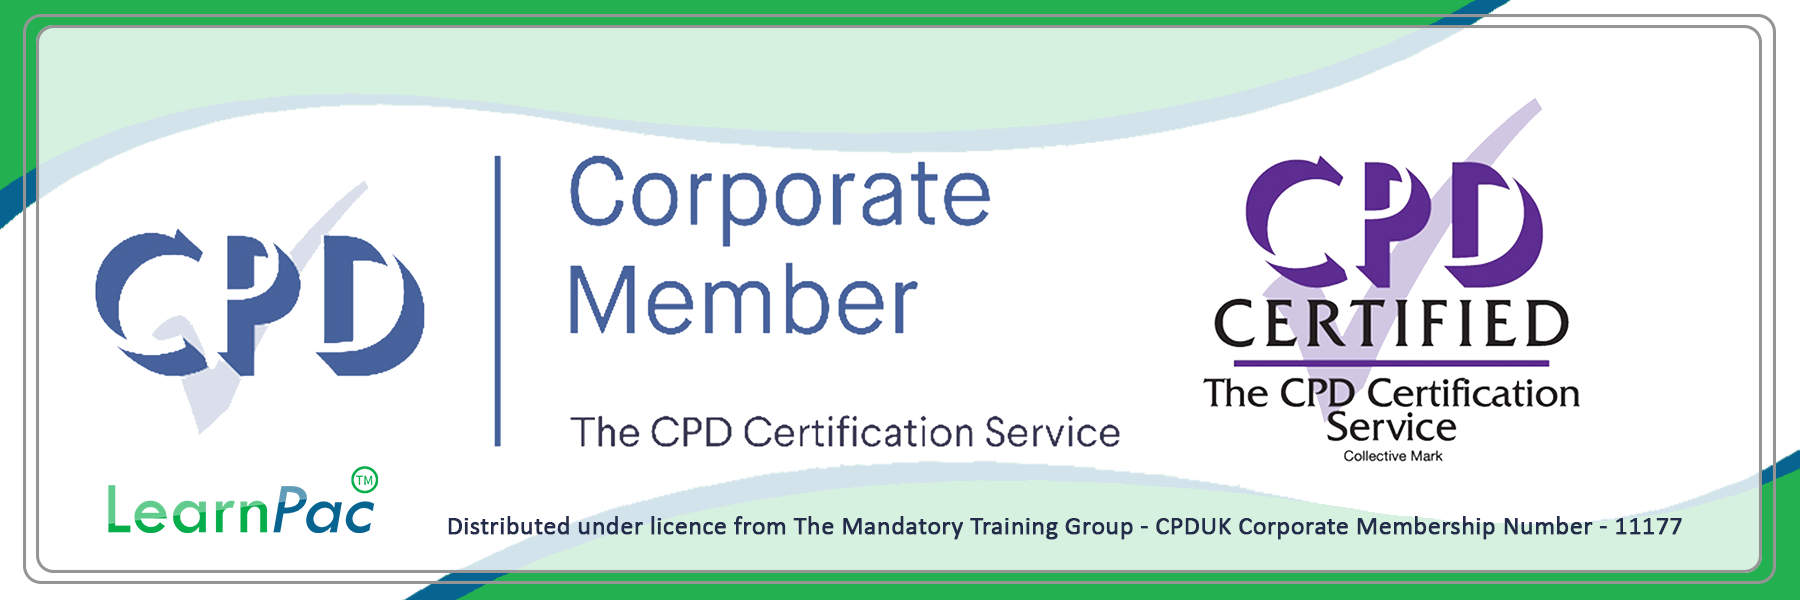 Food Safety Training - E-Learning Courses with Certificates - CPD Certified - LearnPac Systems UK -